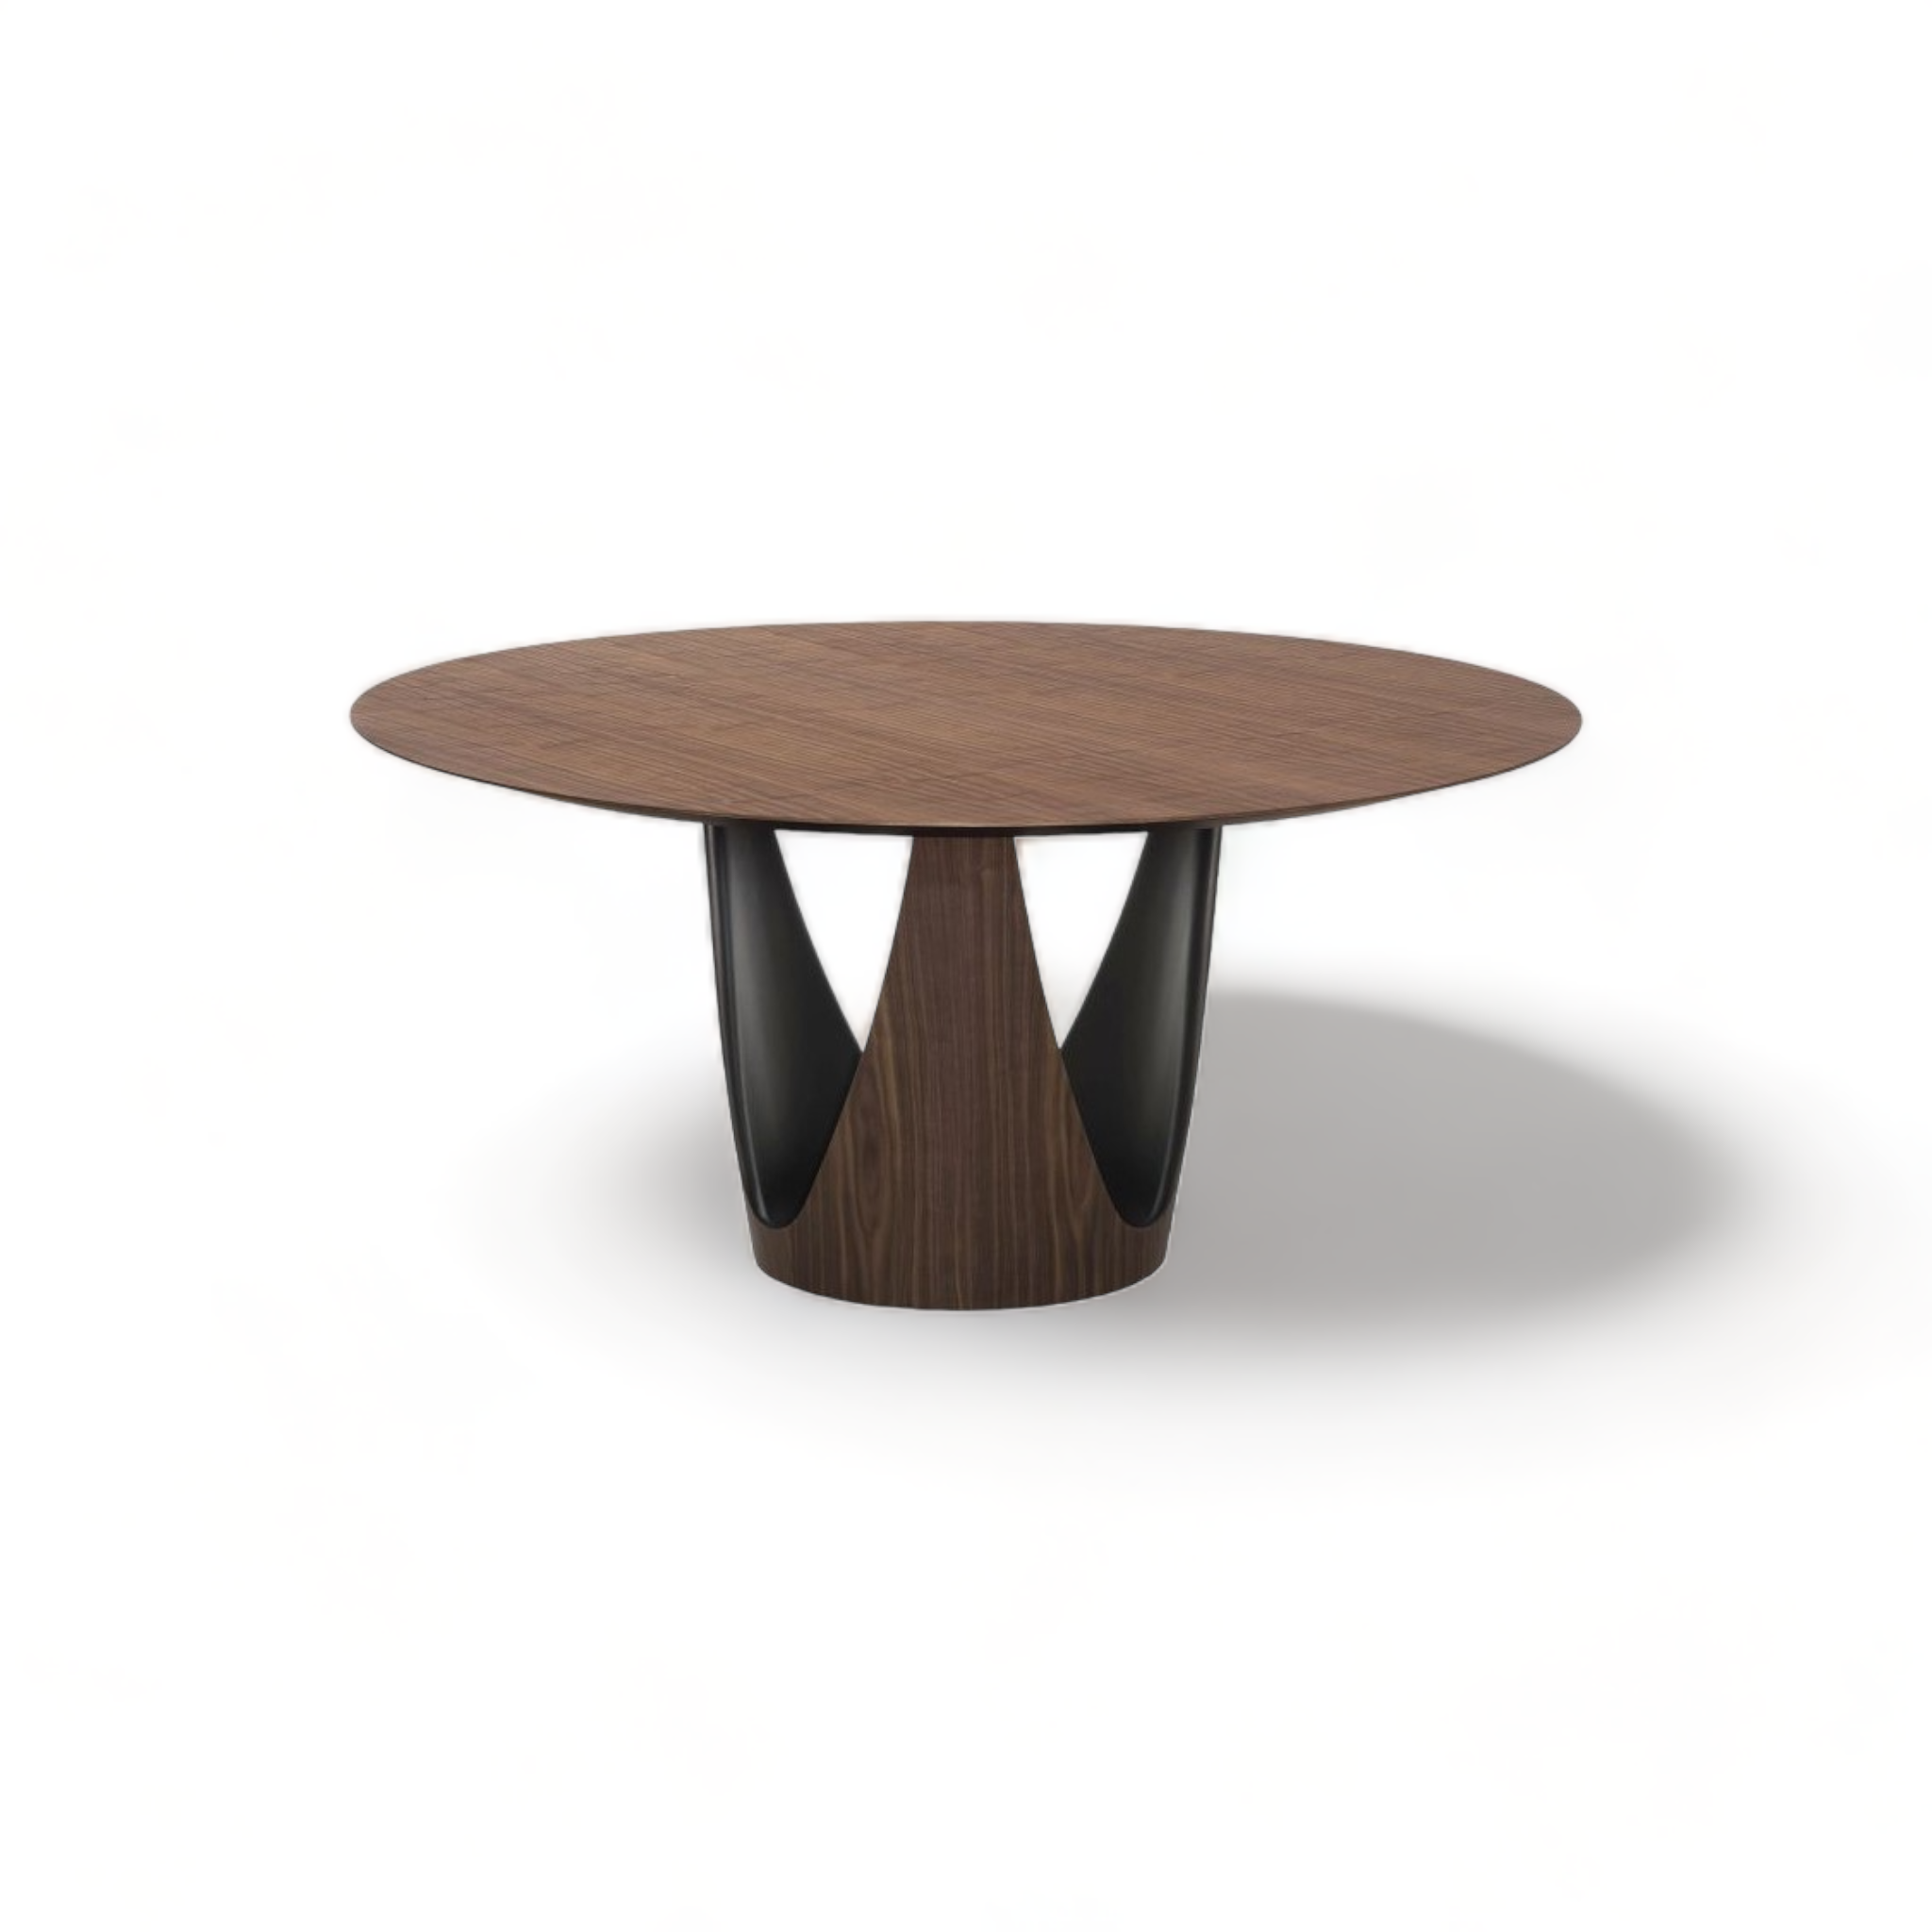 Dodge Round Dining Table